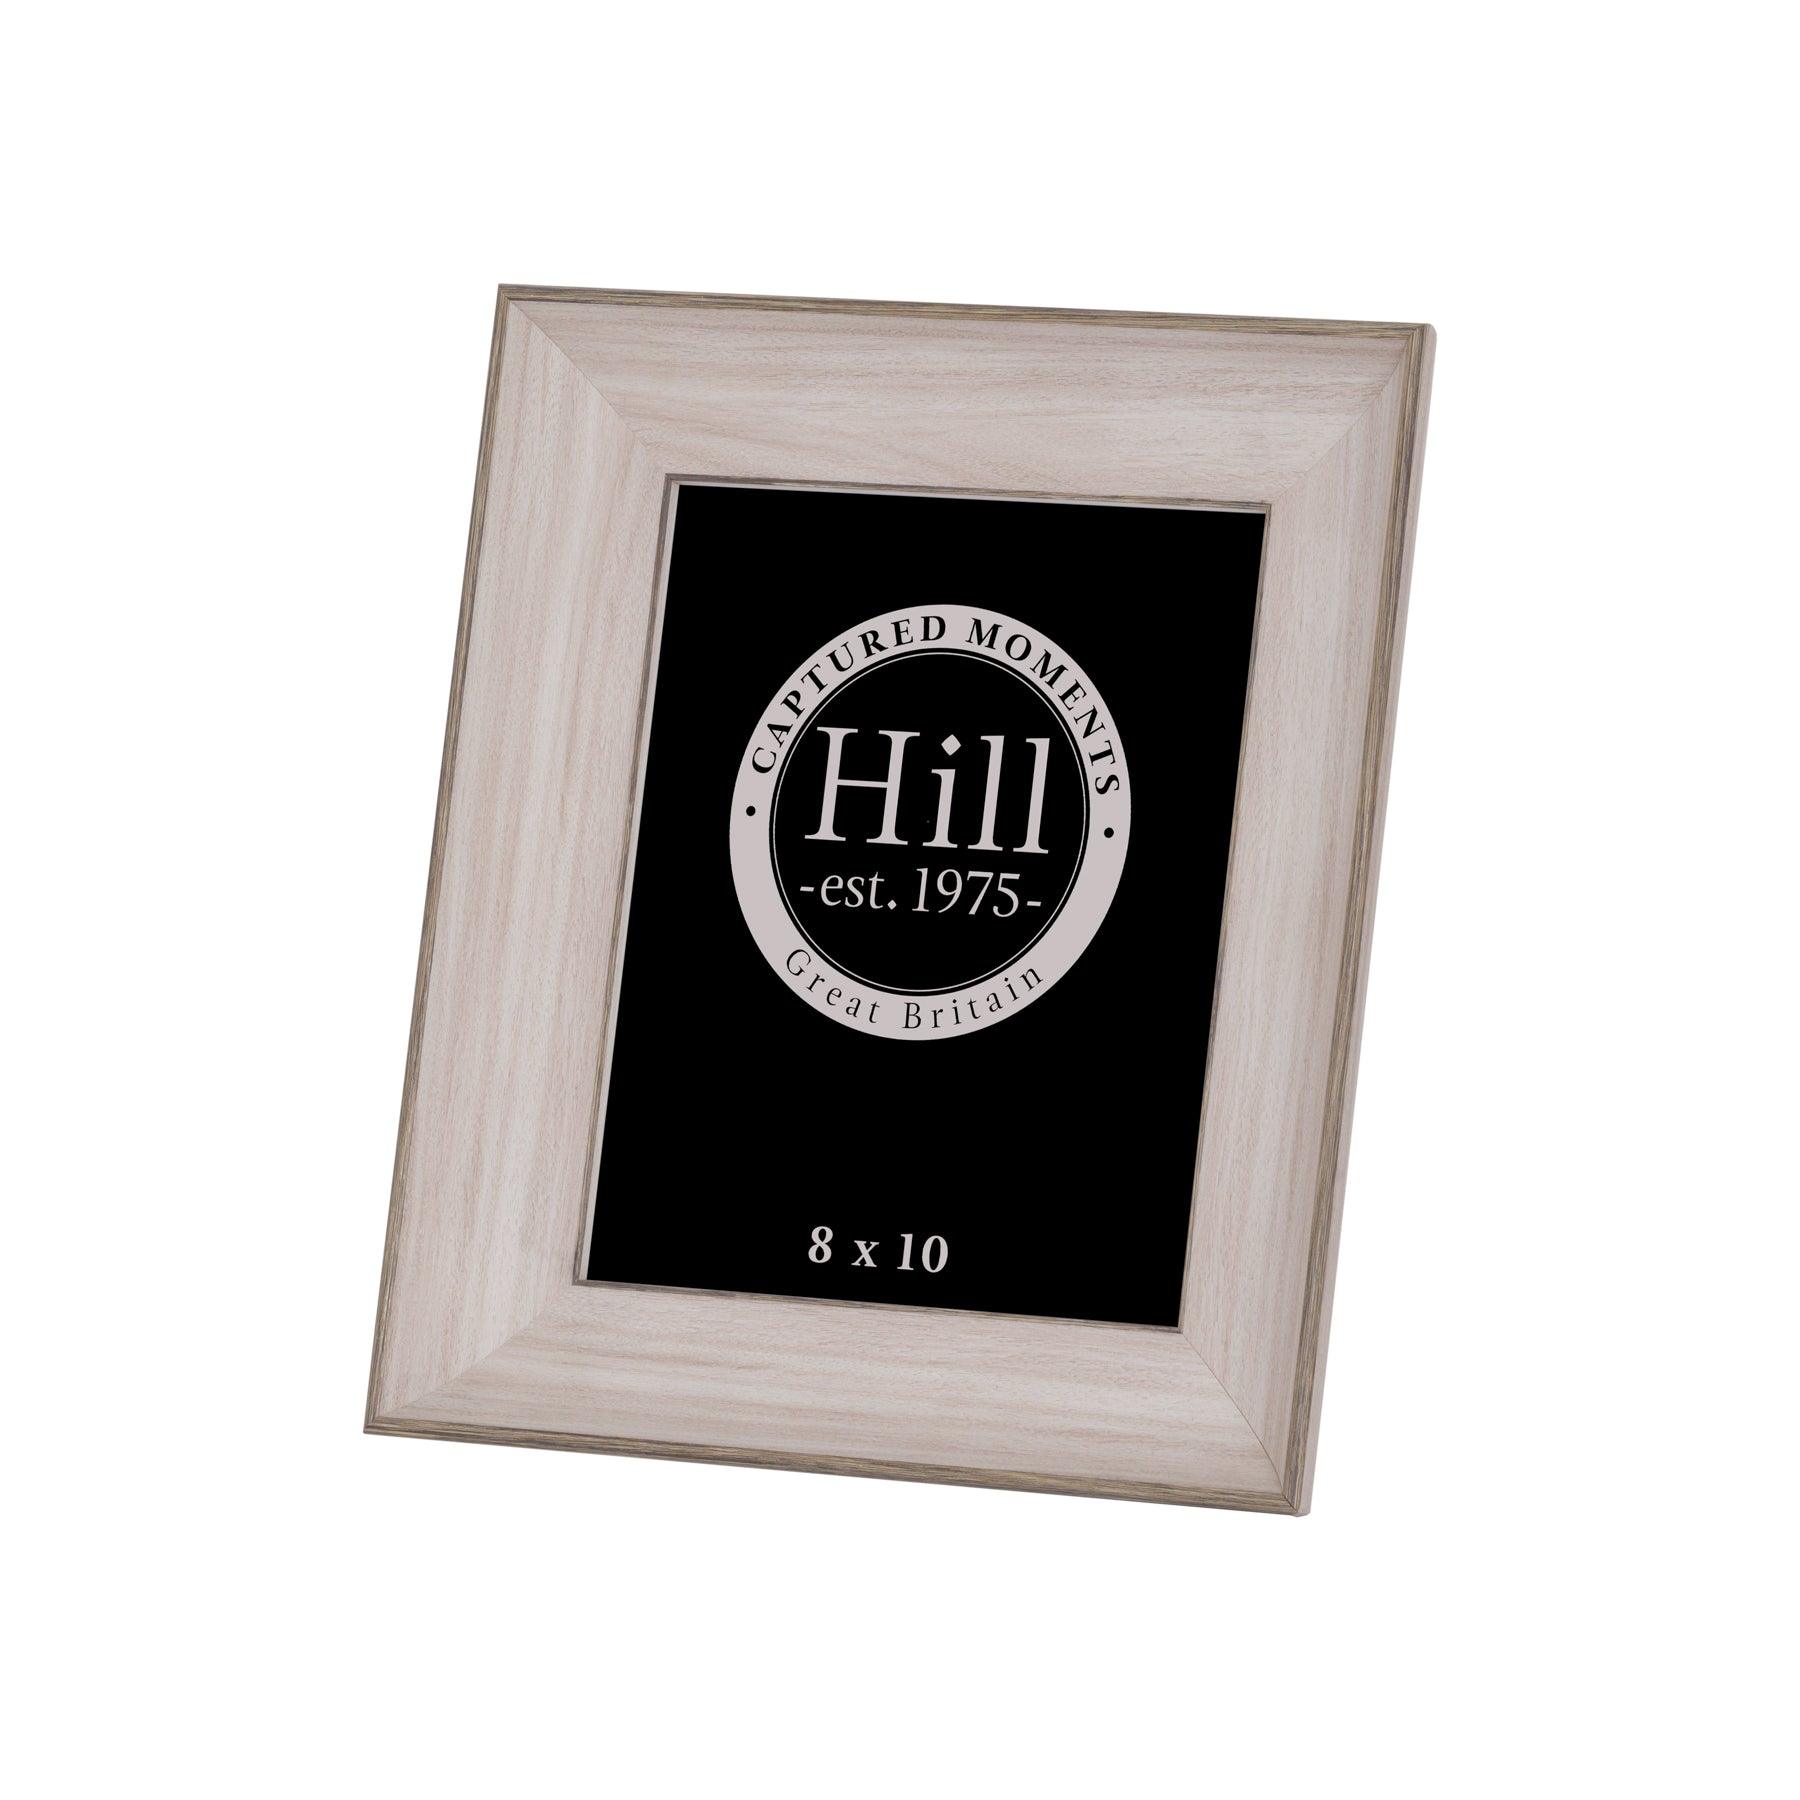 View White Washed Wood Photo Frame 8X10 information